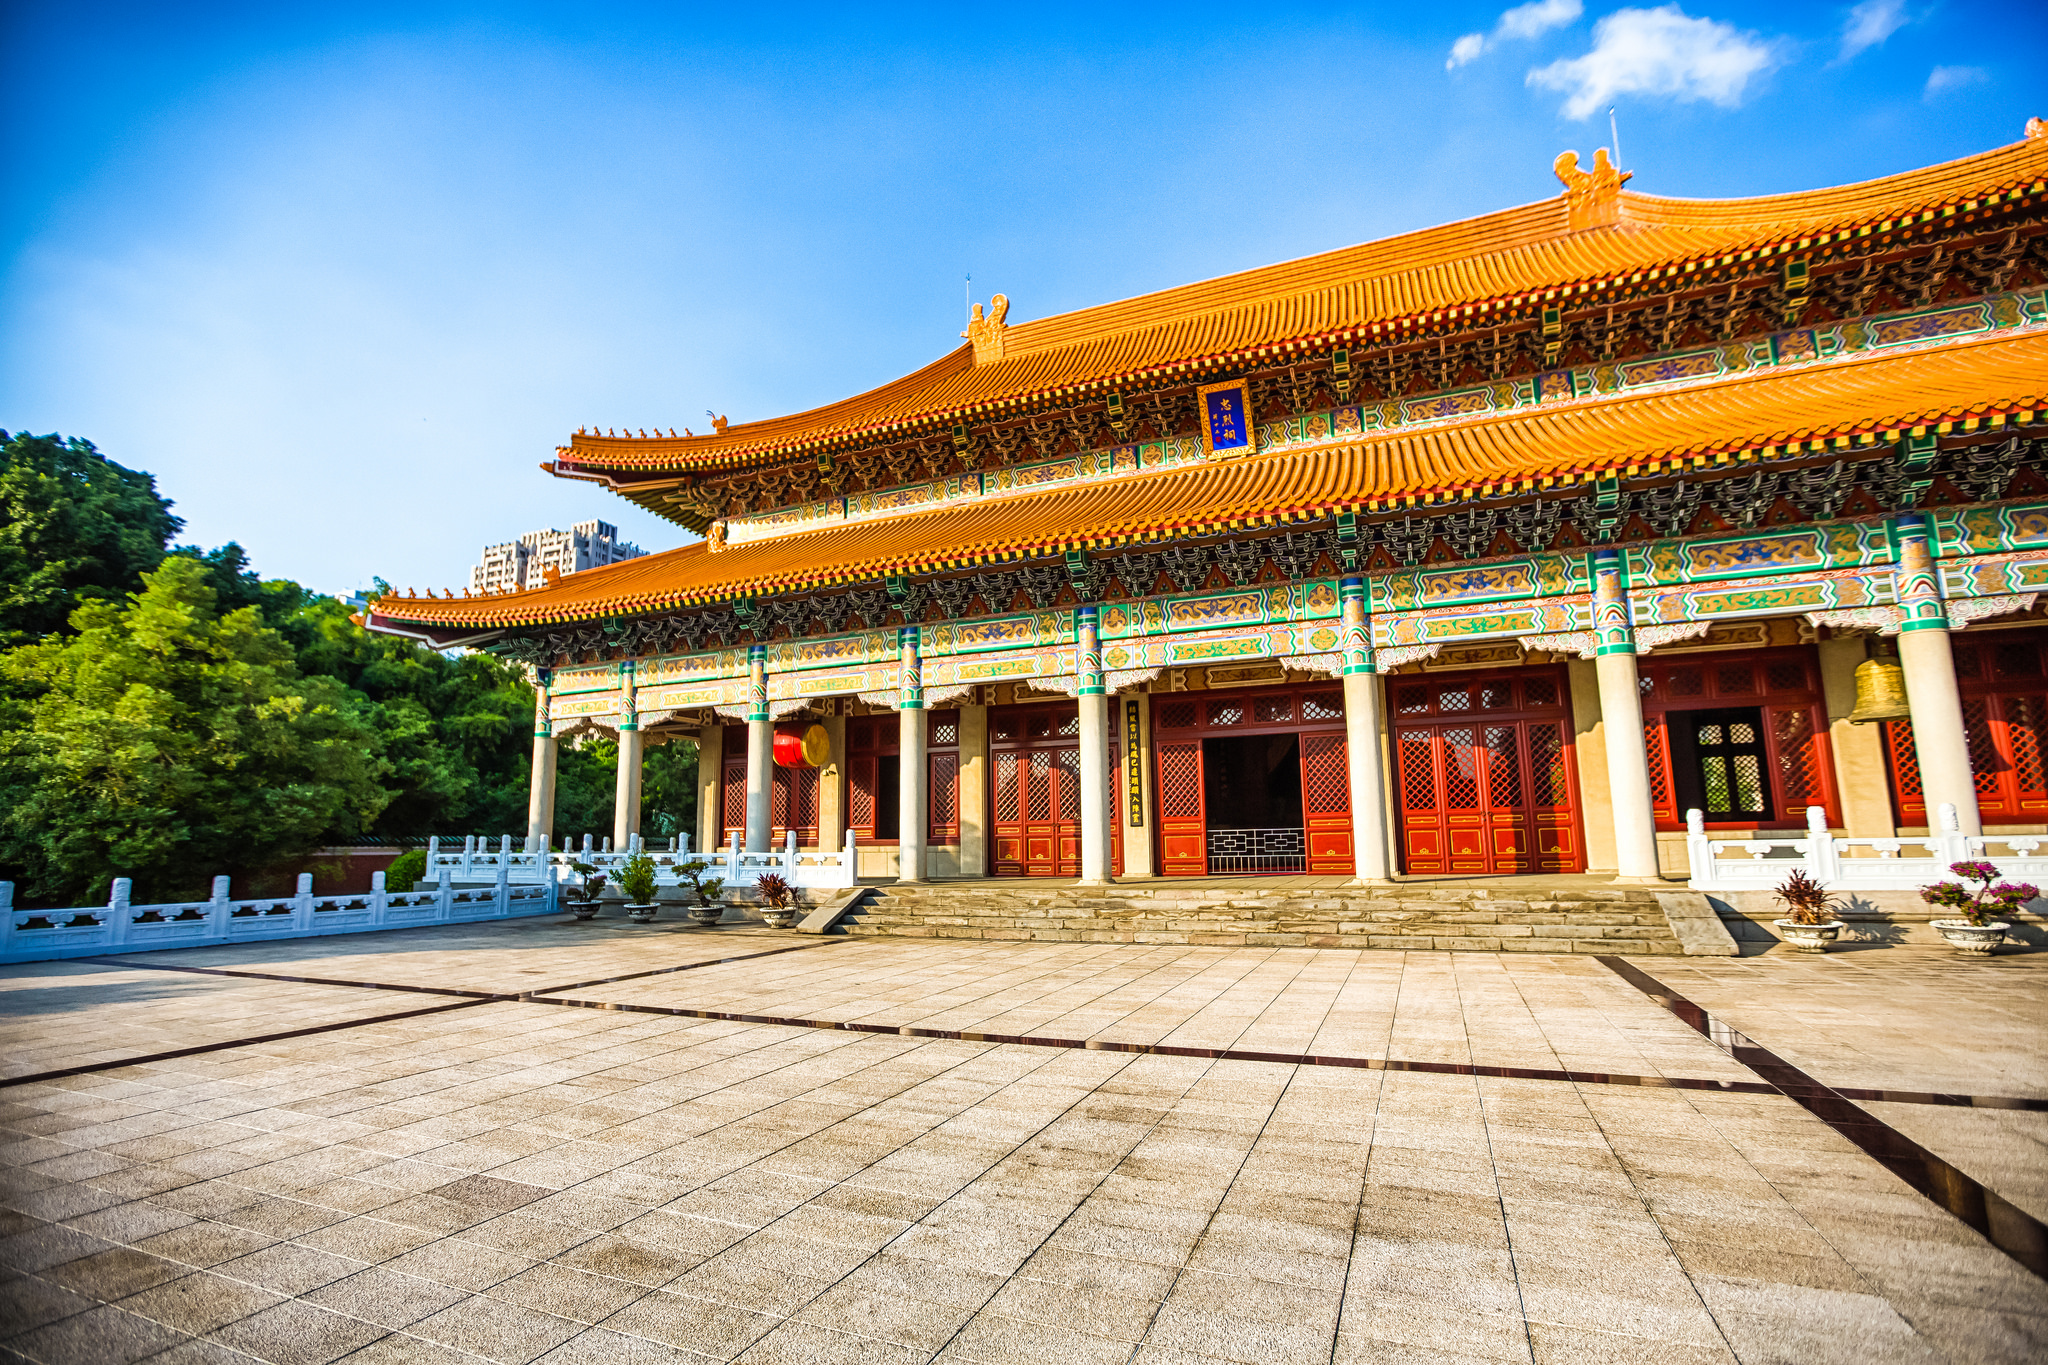 The Taichung Martyrs Shrine